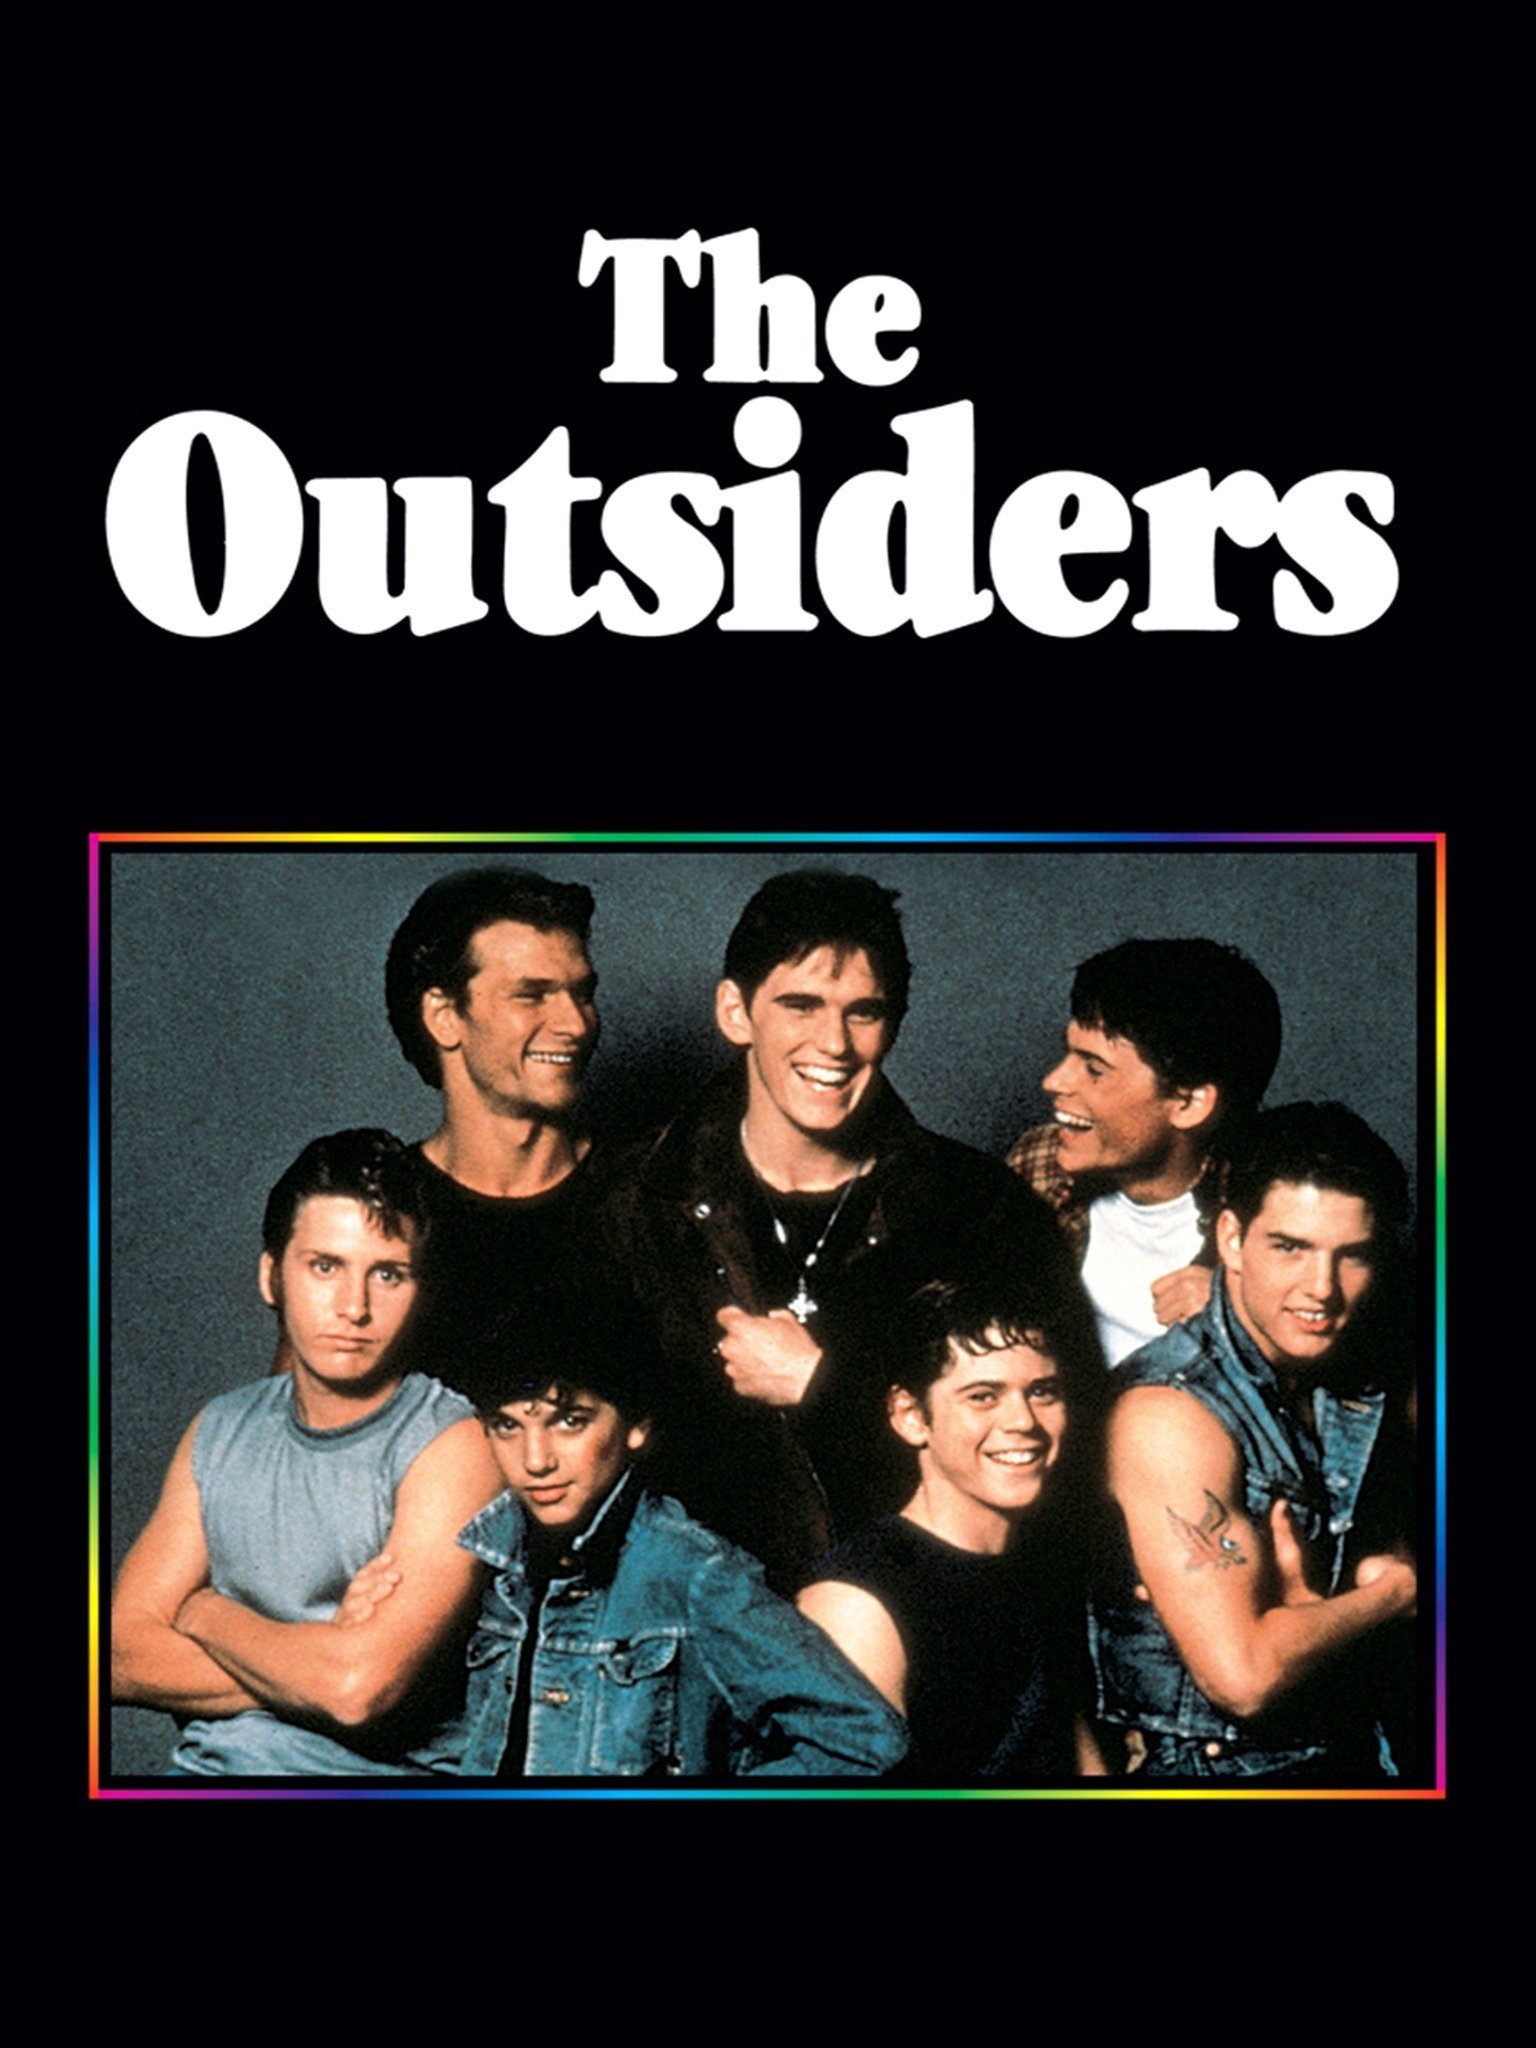 The Outsiders - Movie Reviews